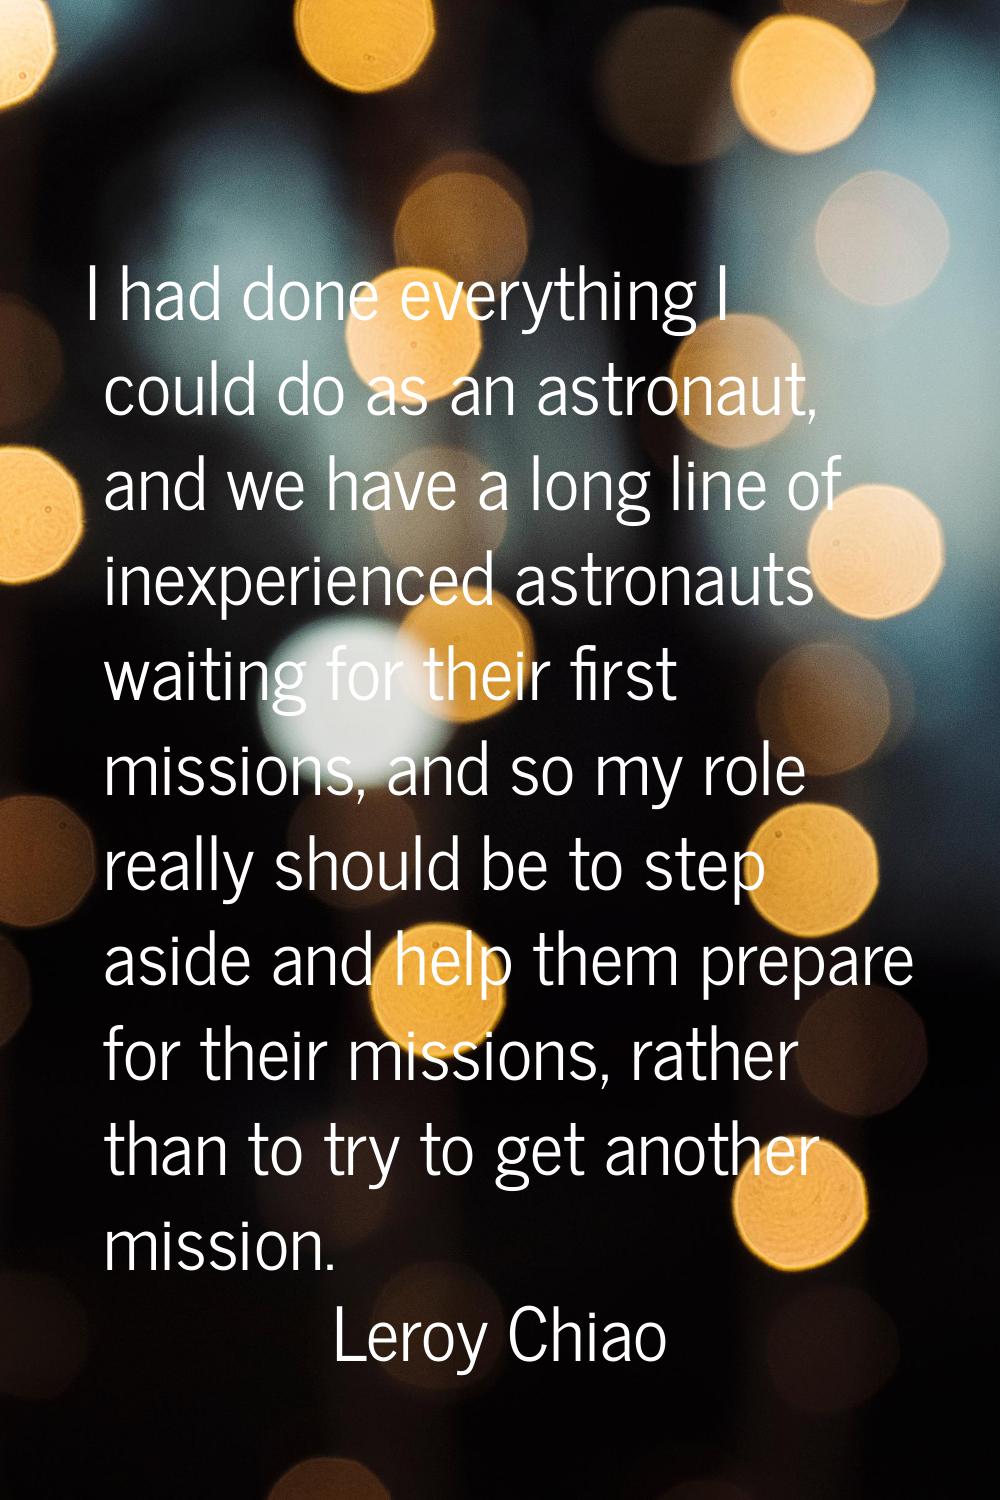 I had done everything I could do as an astronaut, and we have a long line of inexperienced astronau